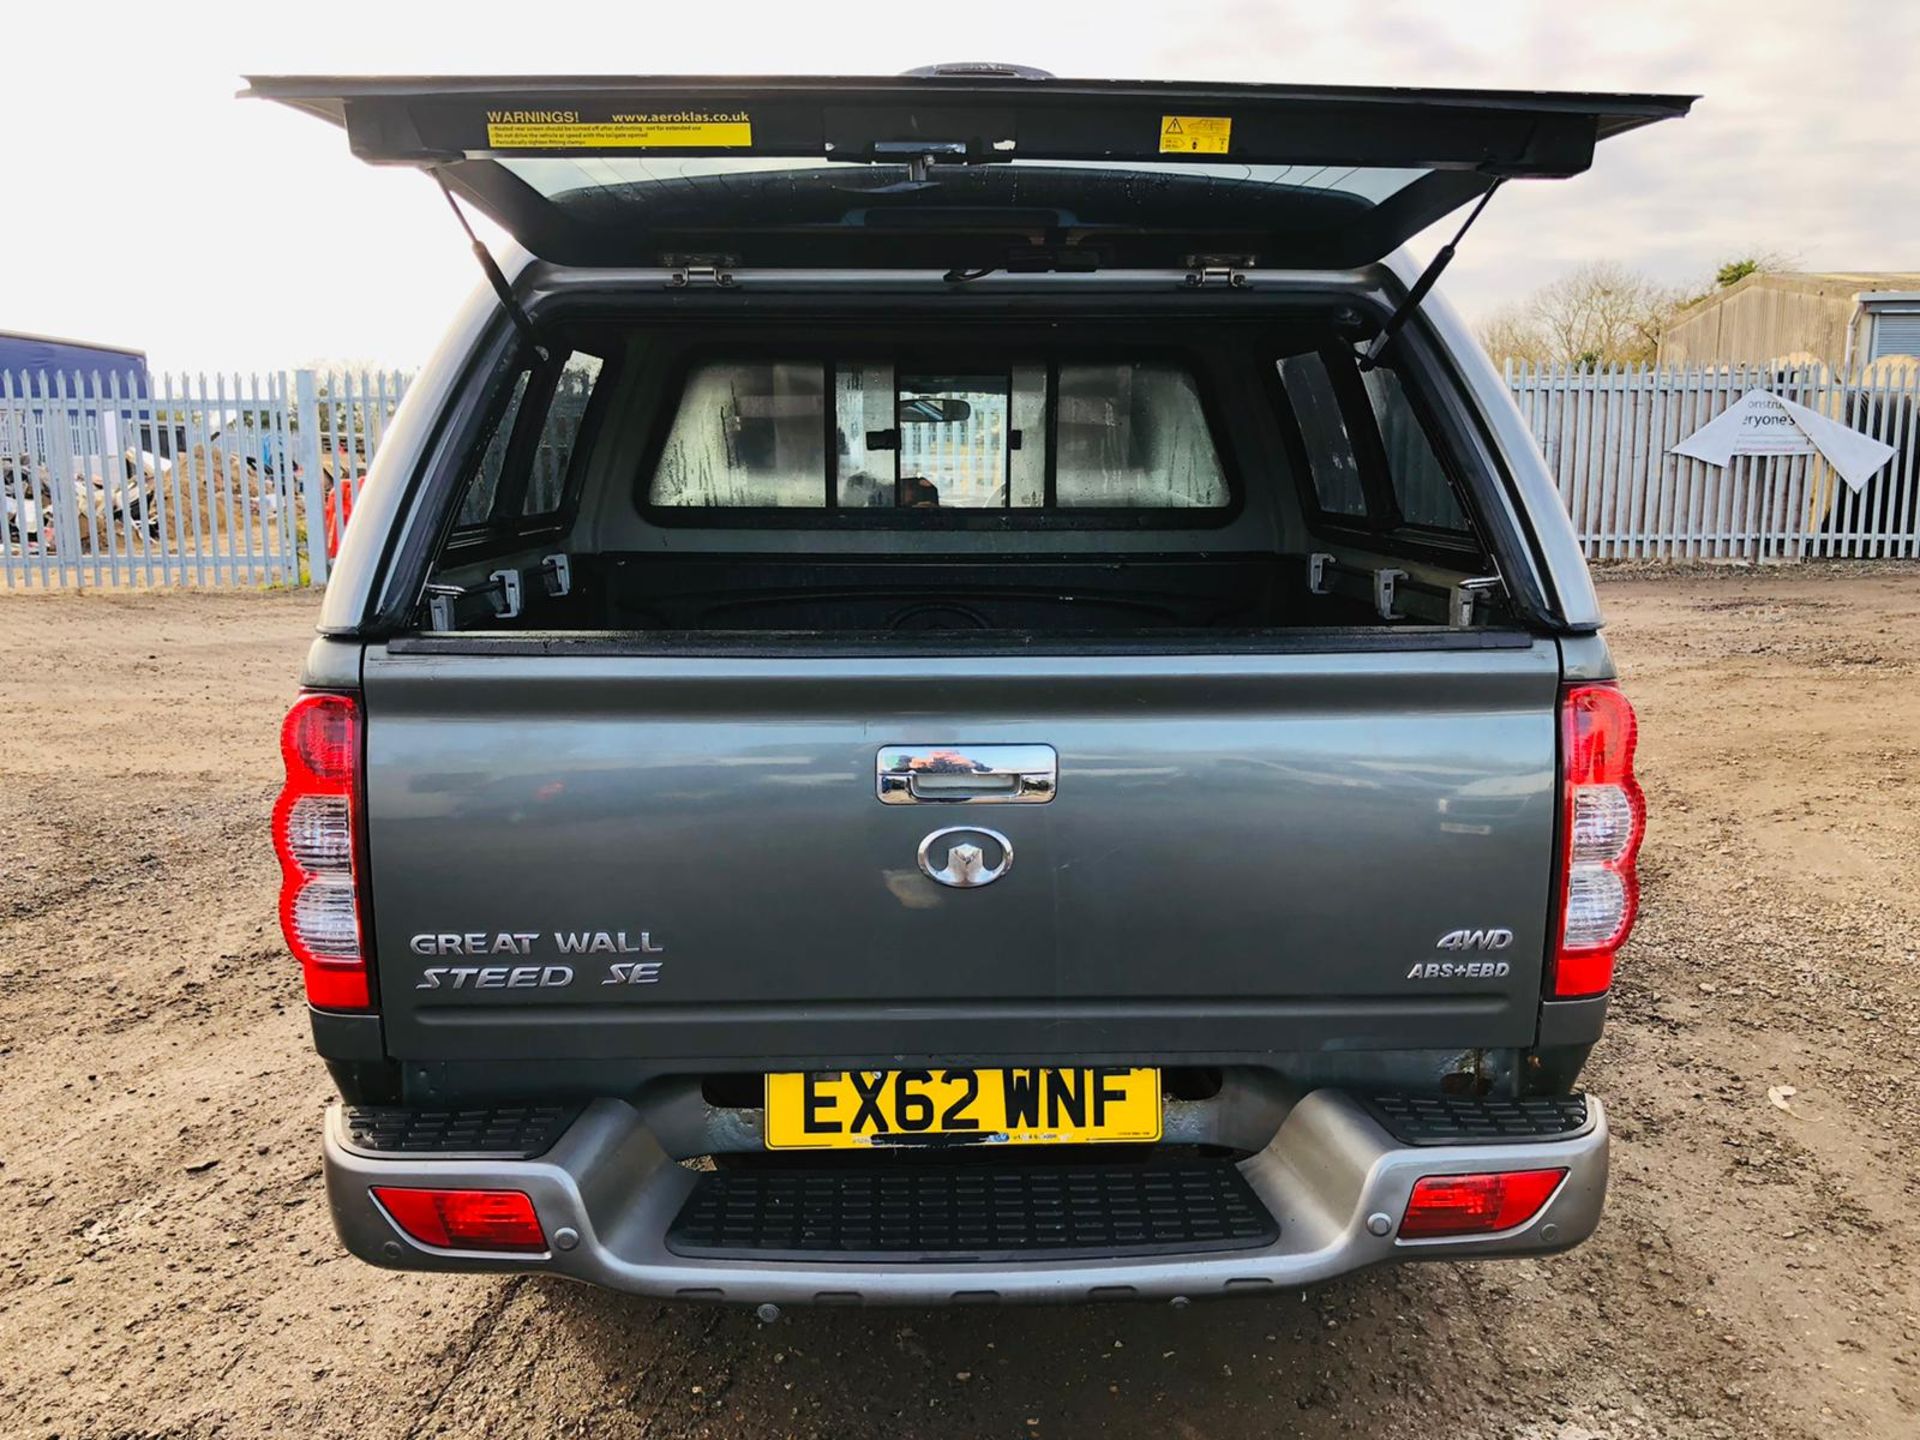 Great Wall Steed 2.0 TD 143 SE ( Special Equipment ) 4x4 Double Cab 2013 '62 Reg' - Image 12 of 24